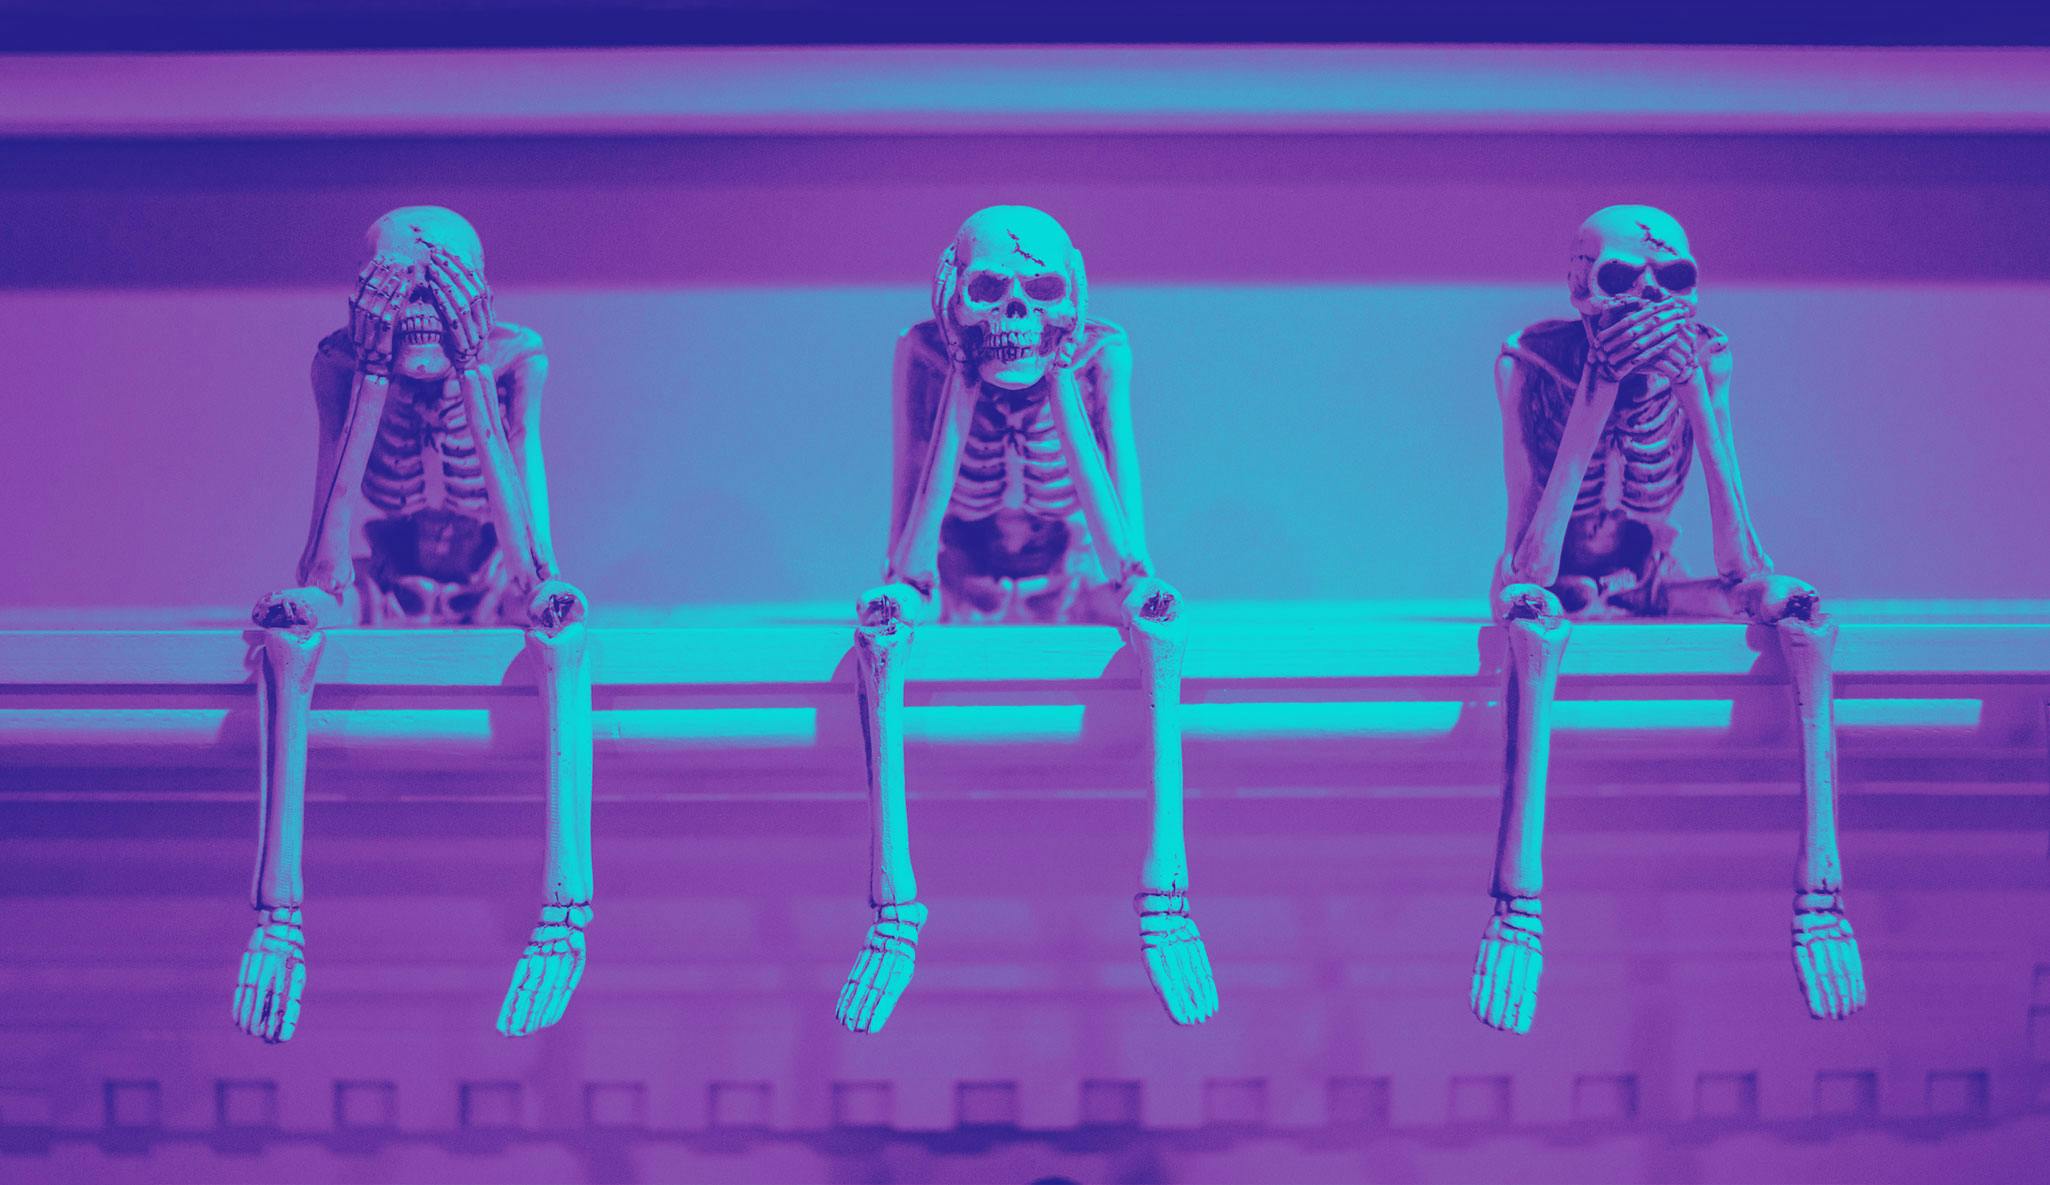 Skeletons sitting on a bench